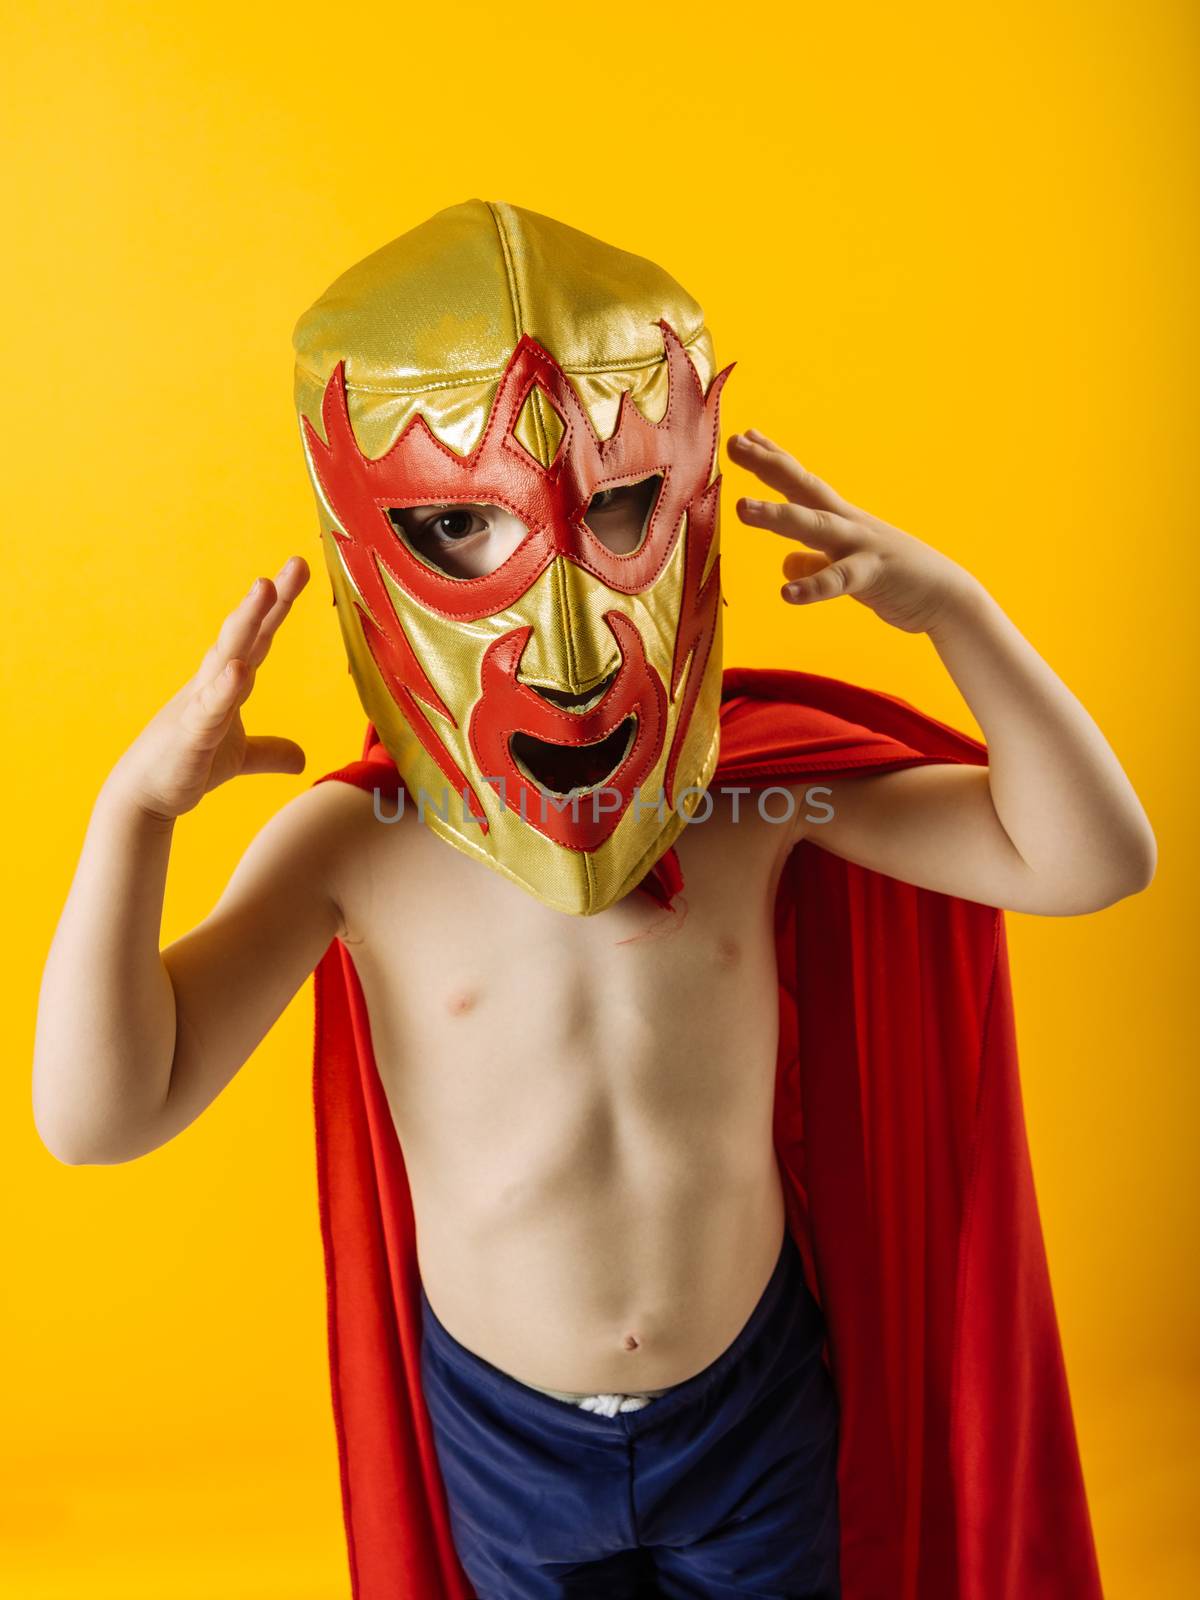 Photograph of a 4 year-old dressed as a Mexican wrestler or Luchador.
